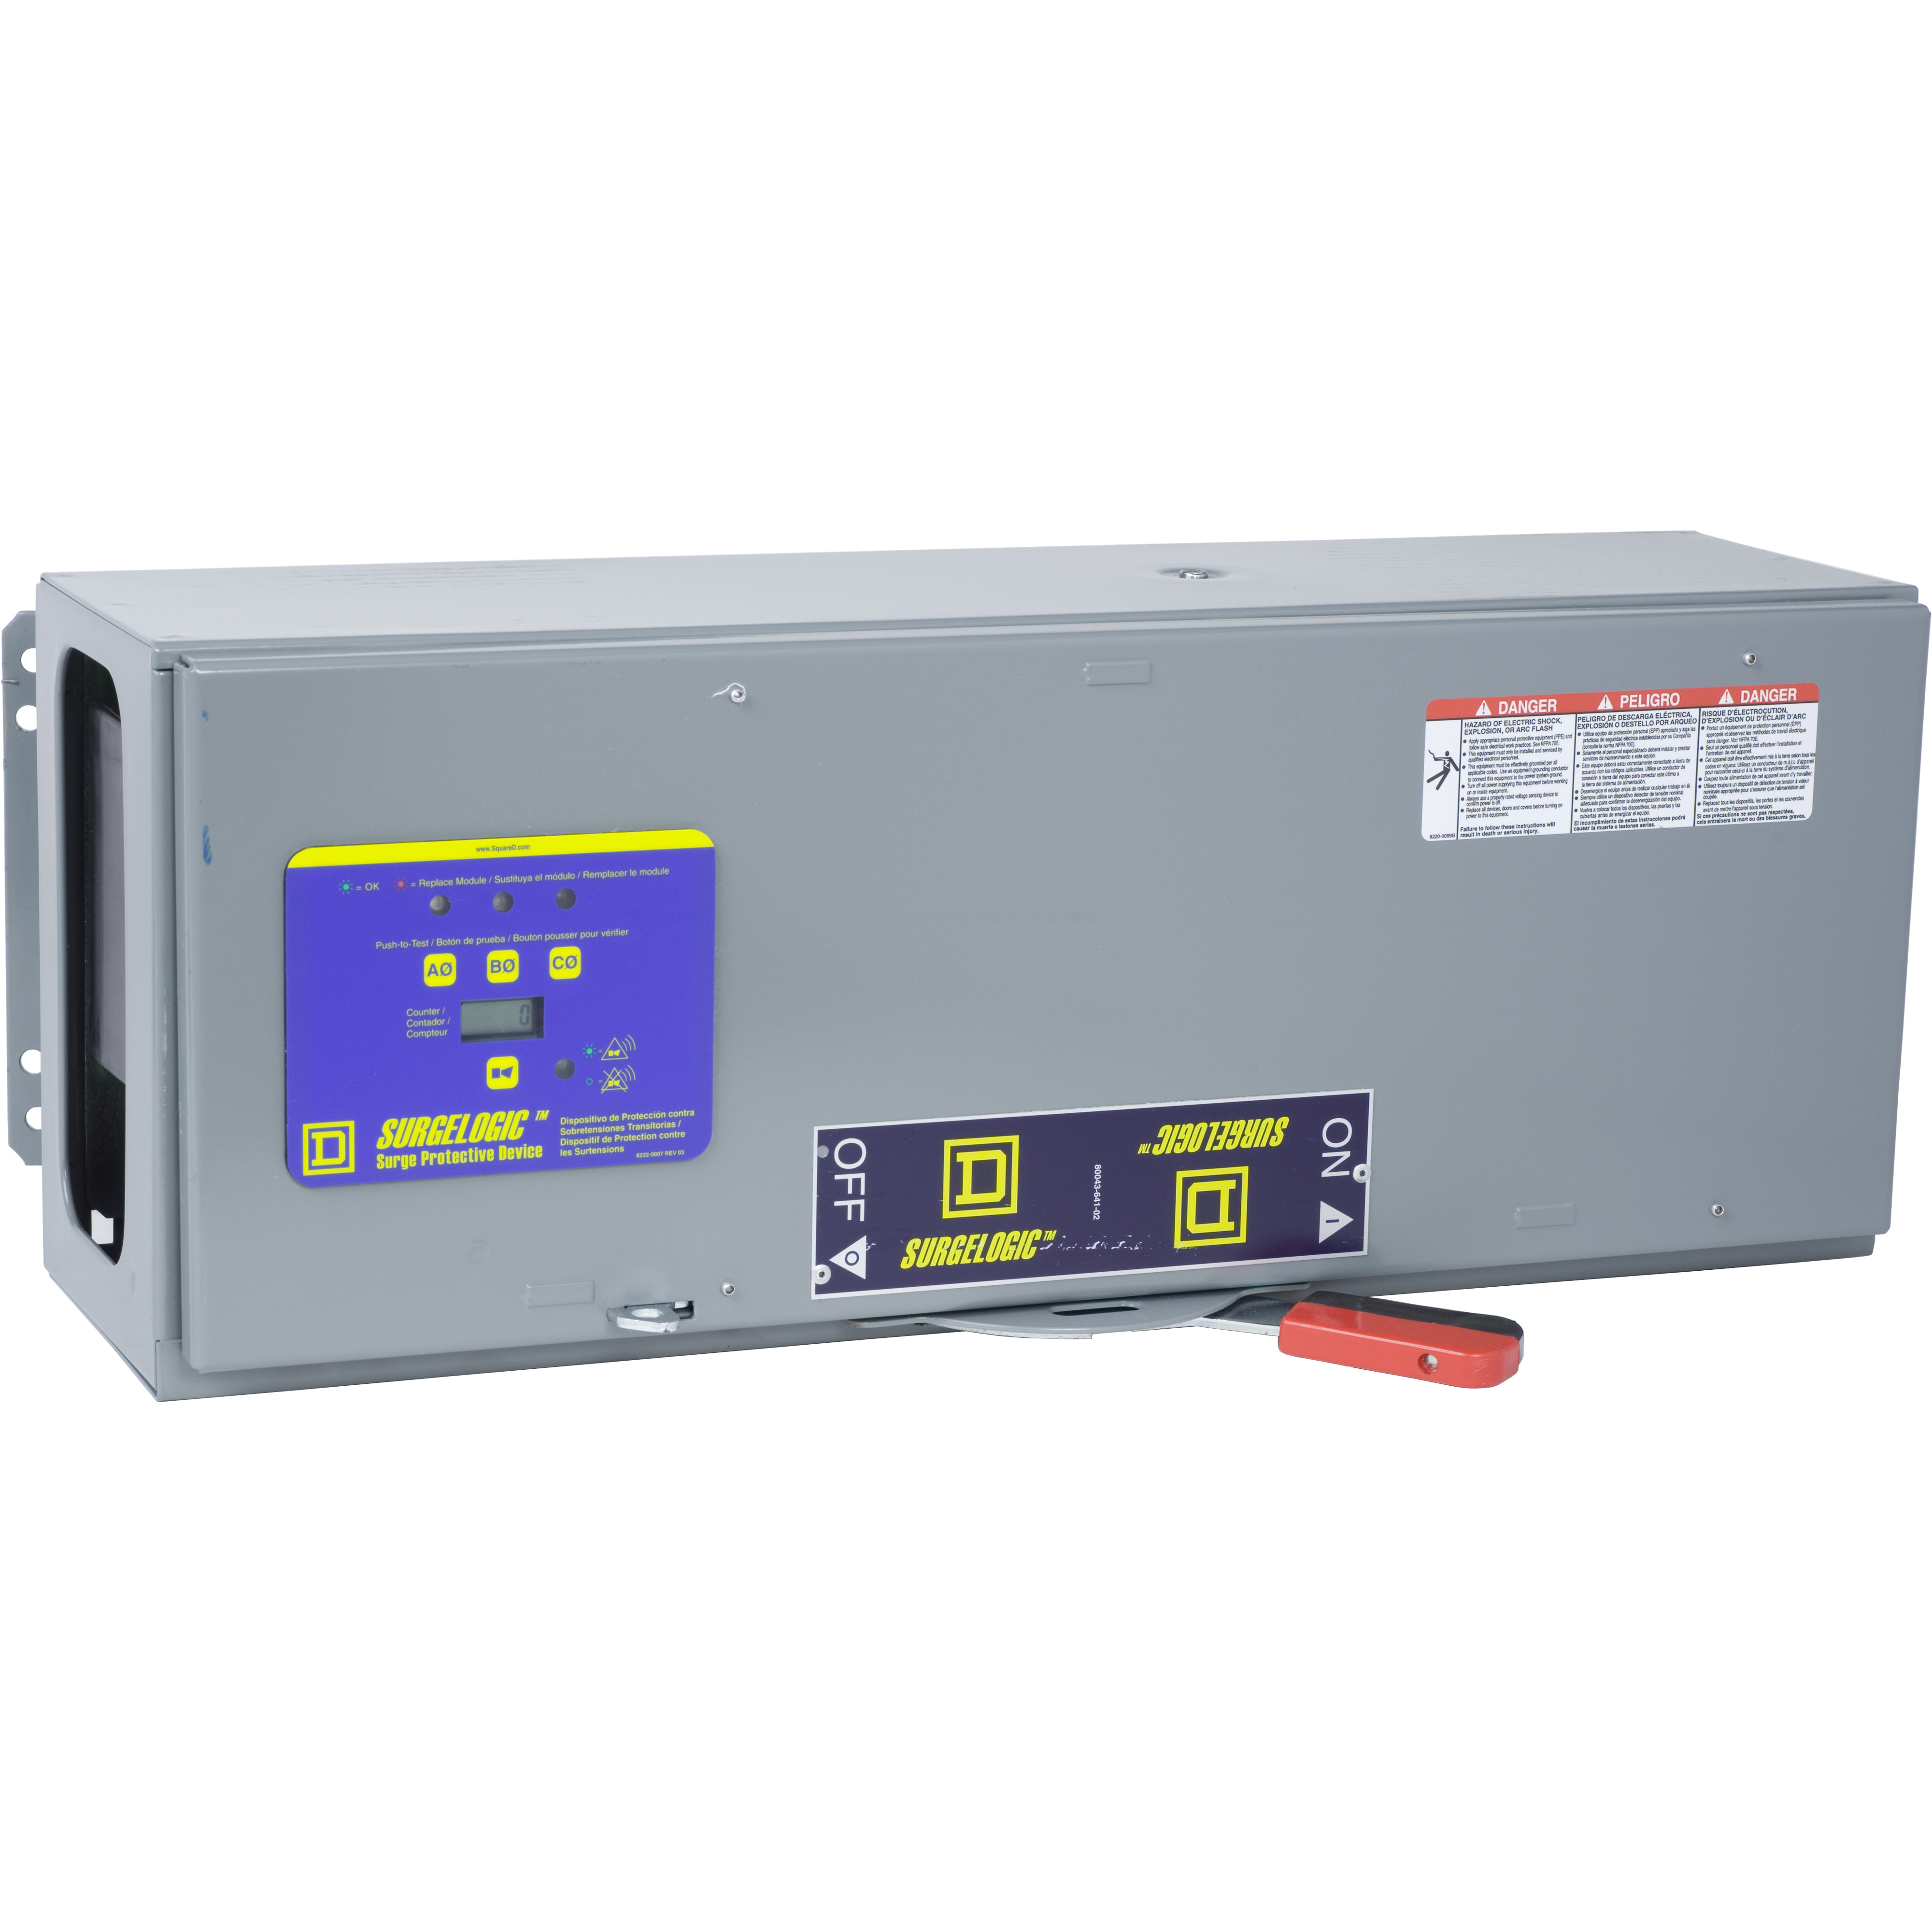 Surge protection device, Surgelogic, QMB, 240kA, 600Y/347 VAC, 3 phase, 4 wire, SPD type 2